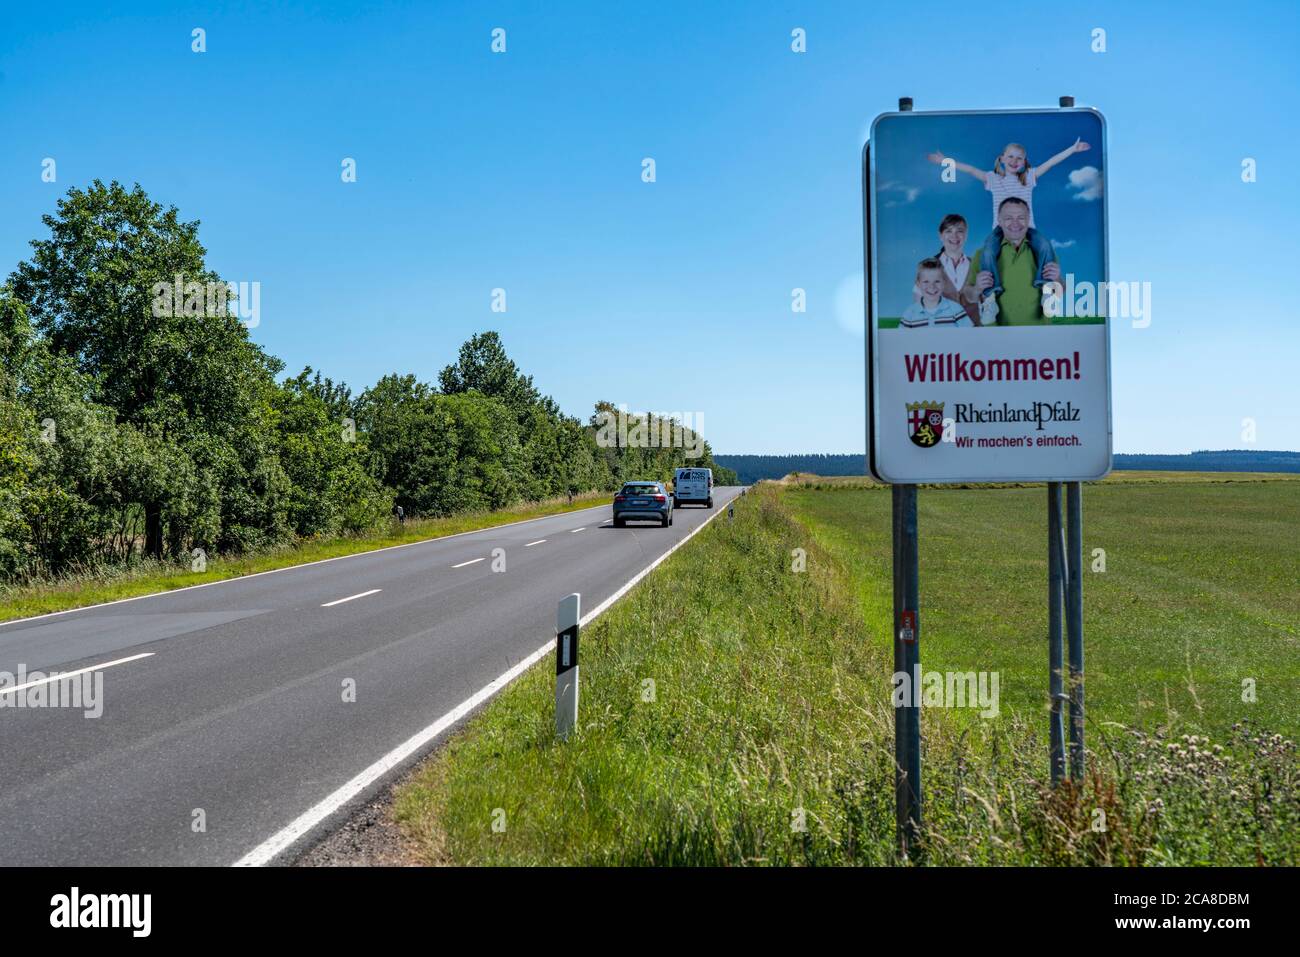 Federal road B265, state border south of the town Kehr, between North Rhine-Westphalia and Rhineland-Palatinate, NRW Crest on the road, Germany, Stock Photo